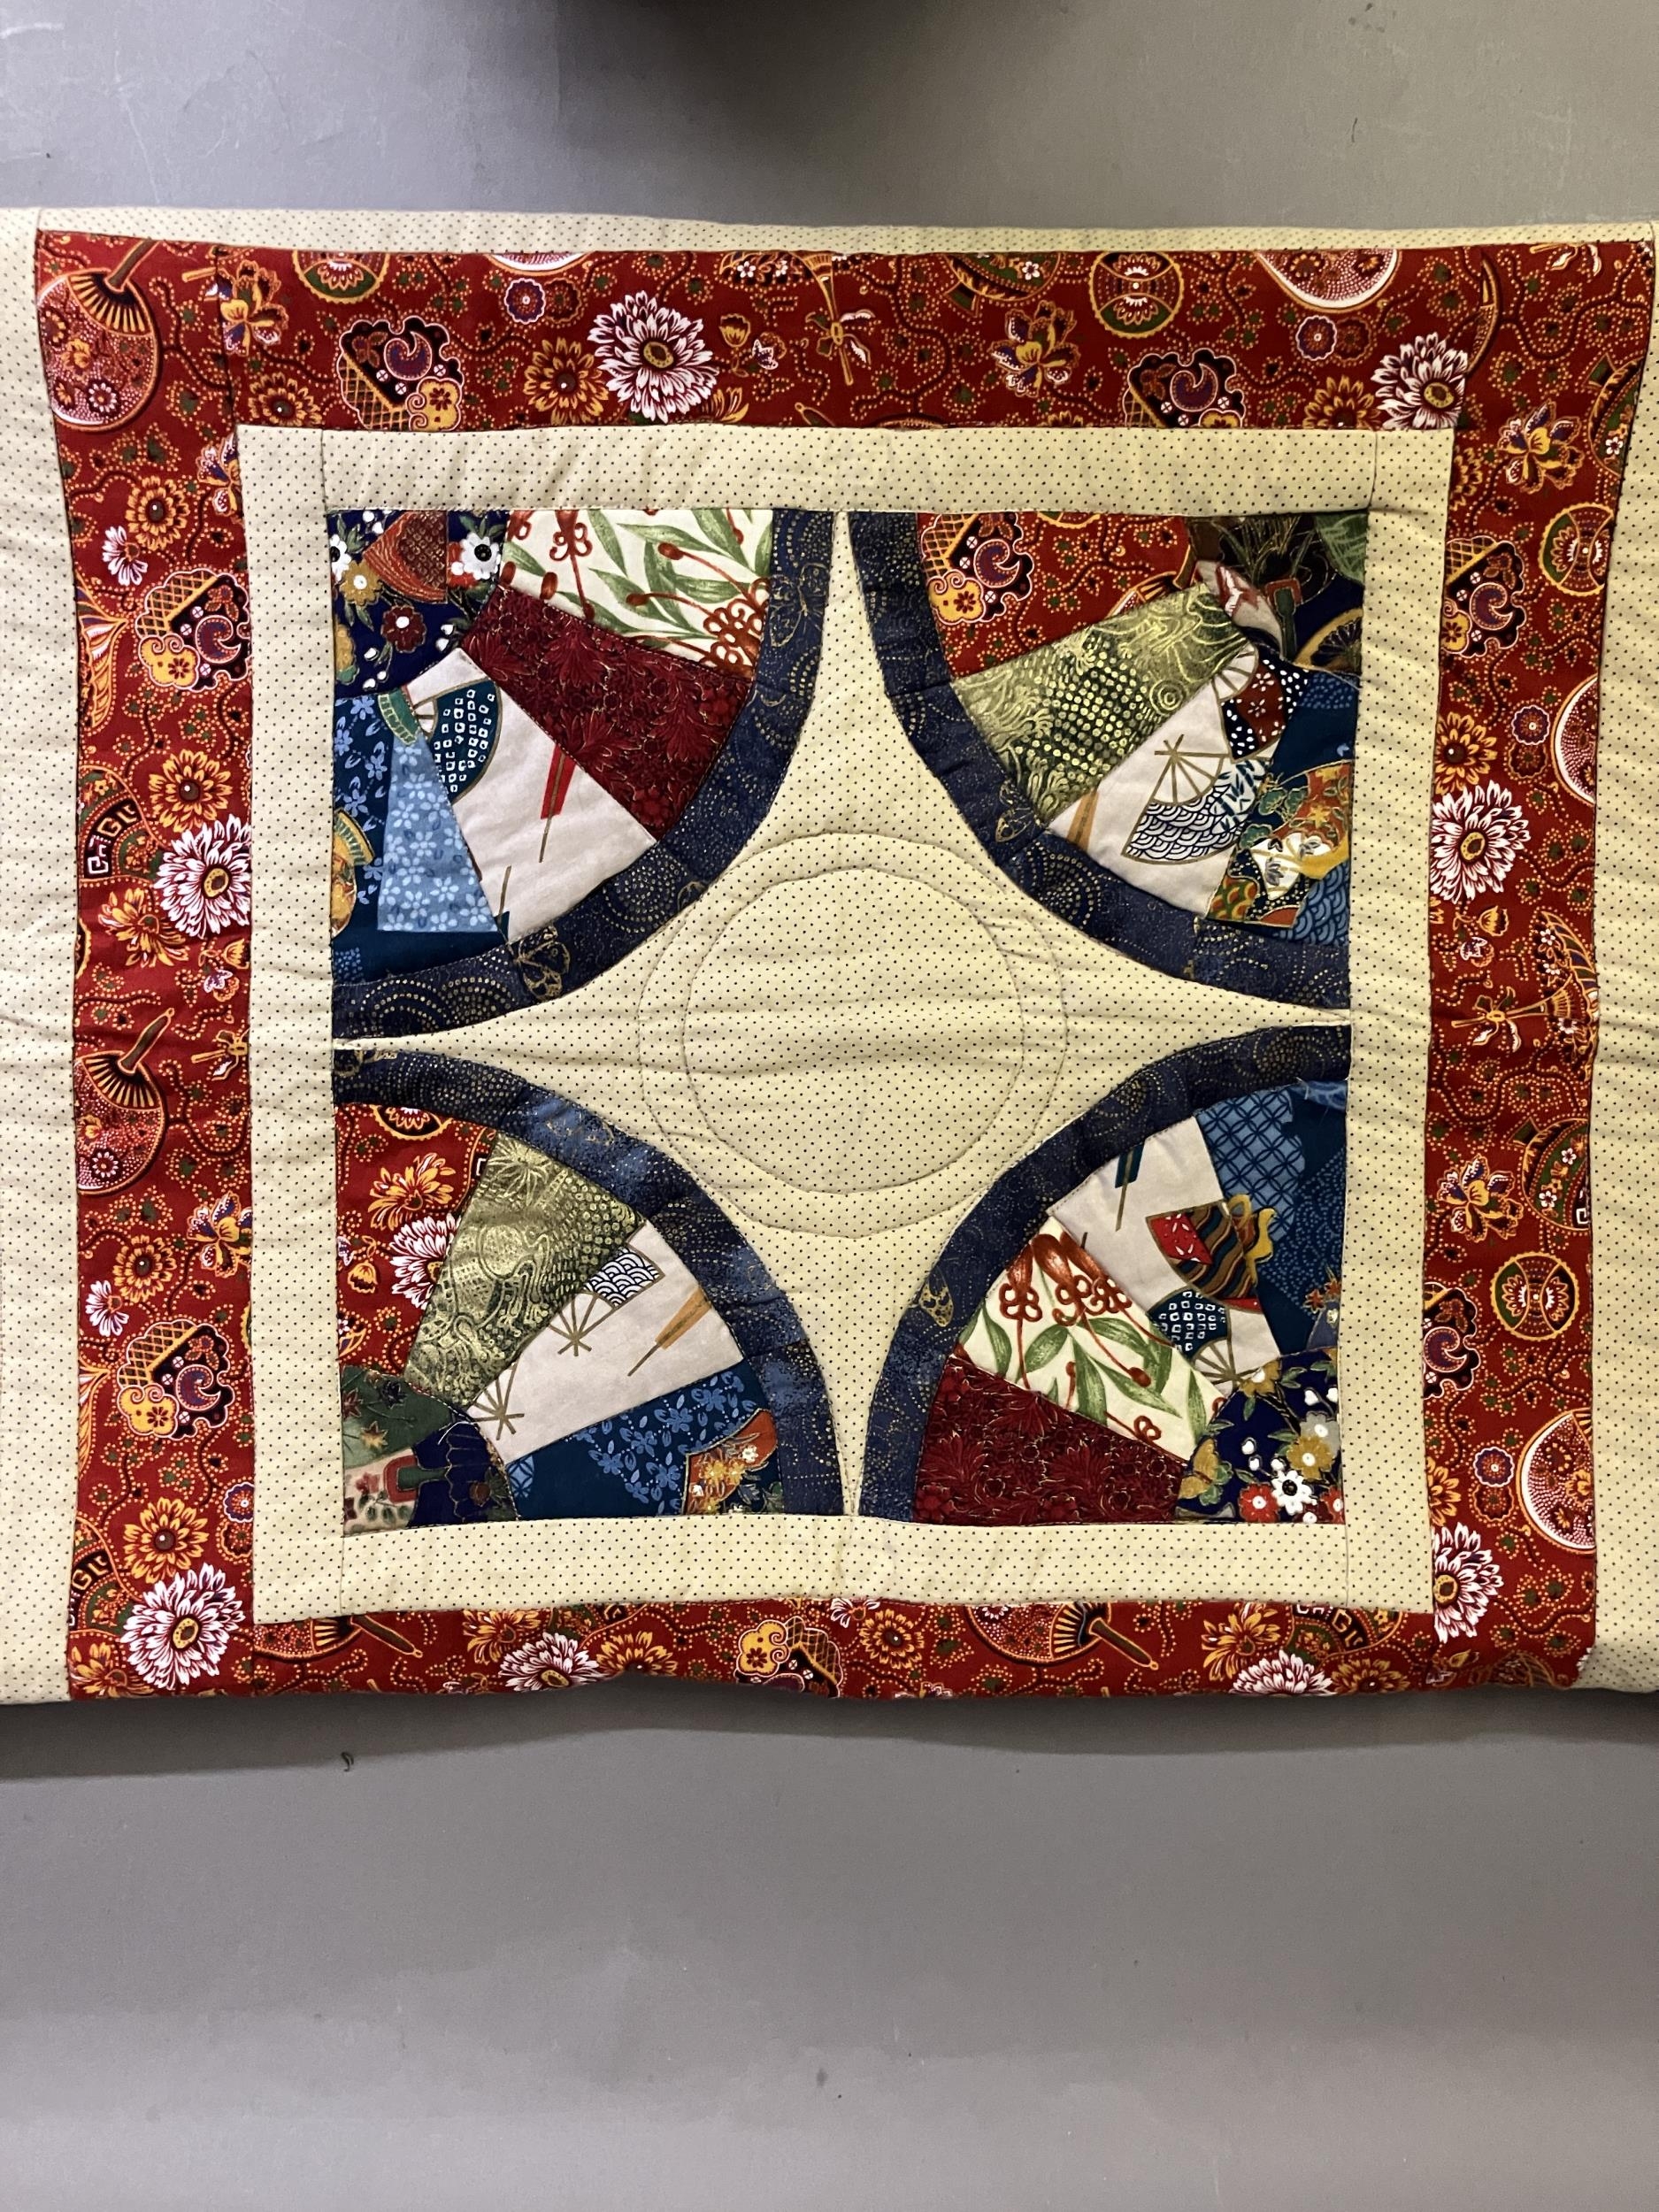 Original fan-designed machine-stitched coverlet by Doris Maxwell, mother of former Fan Circle - Image 3 of 6